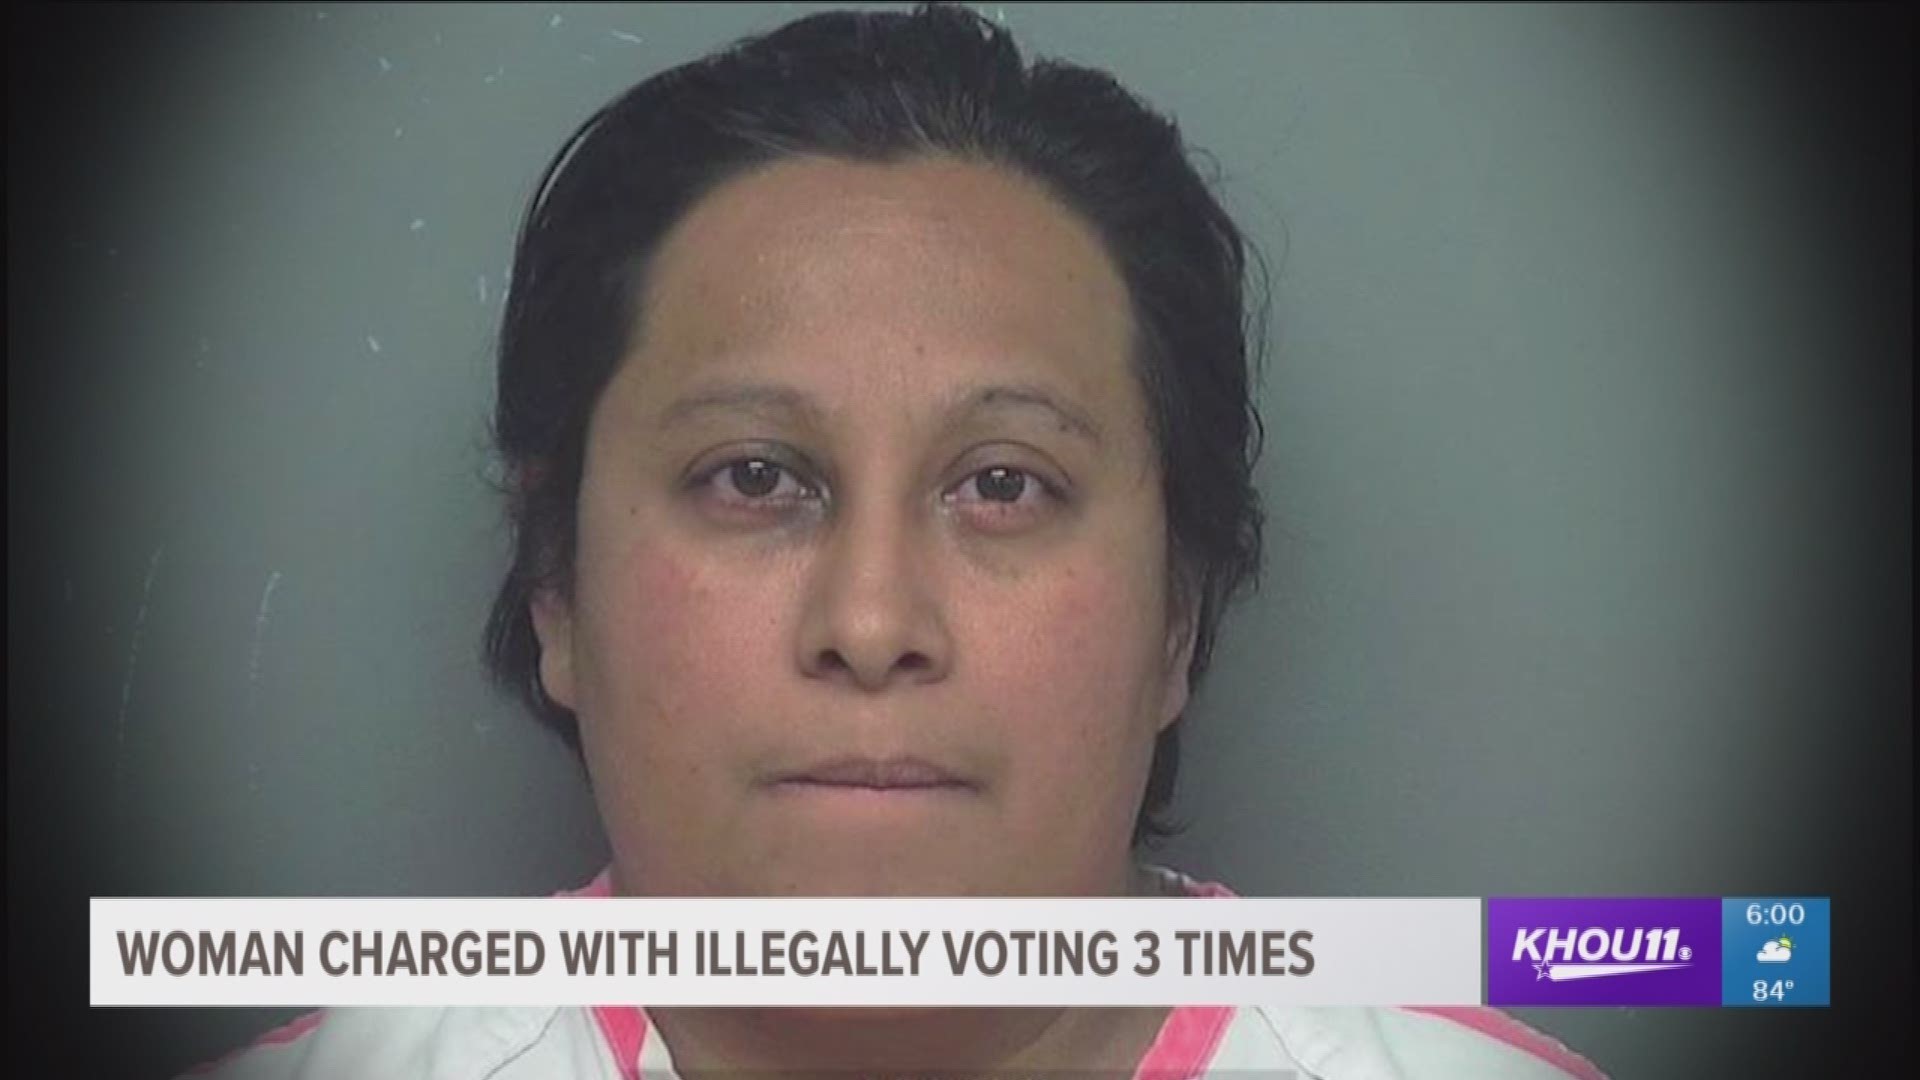 A Houston woman is charged with voter impersonation and ineligible voting for using another woman's identity to vote three times. 